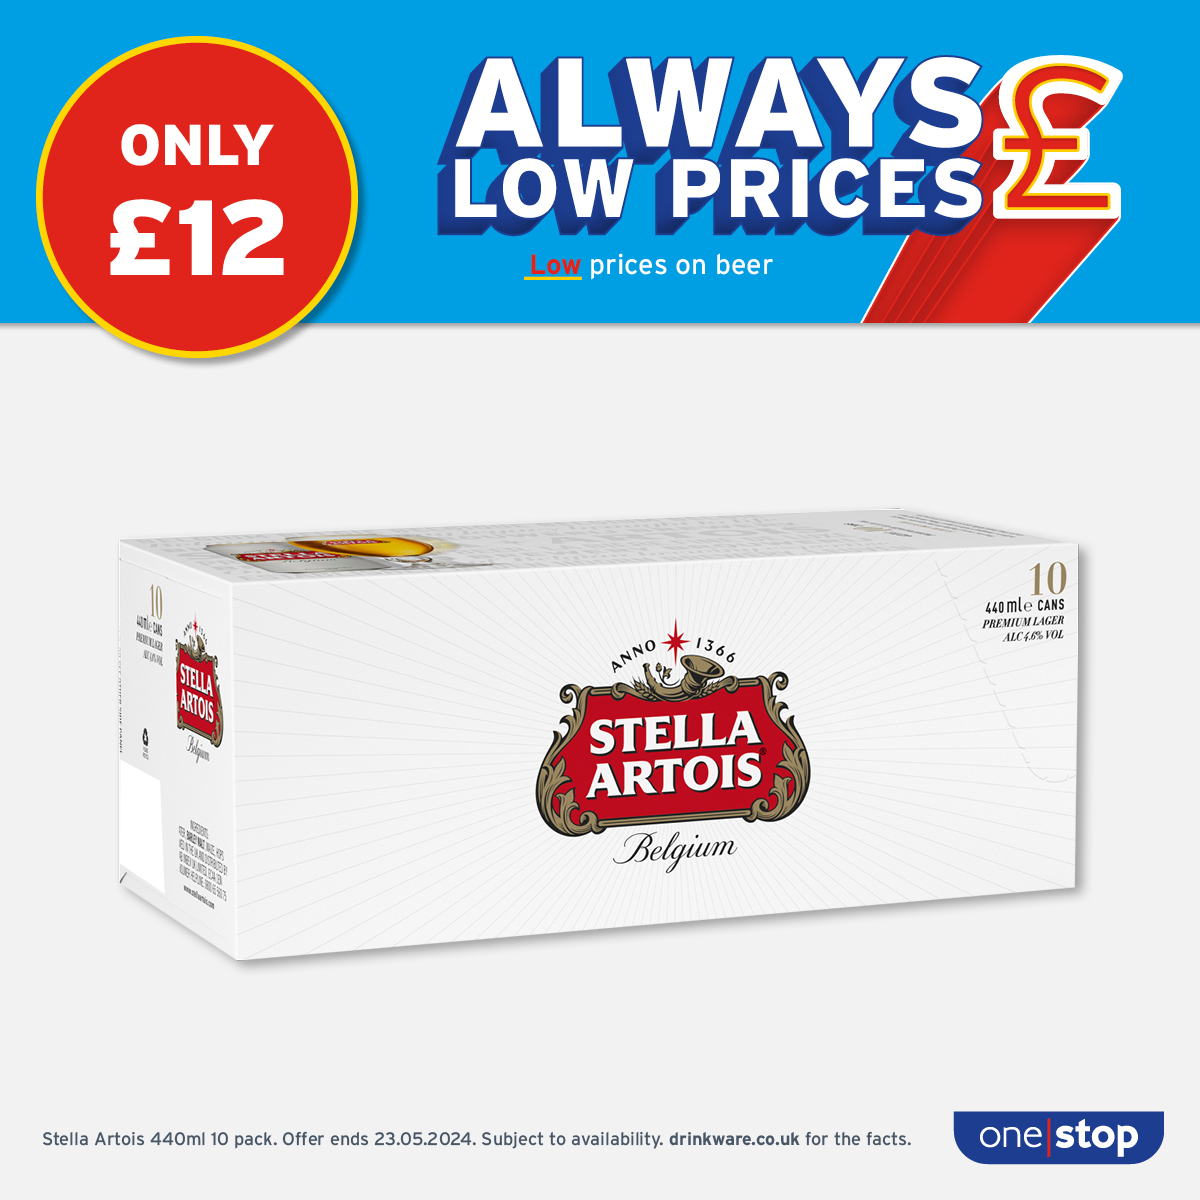 Kickstart your weekend with this irresistible offer! 😍 Find your local store👉onestop.co.uk/store-finder/ Subject to availability. Participating stores only. #AlwaysLowPrices